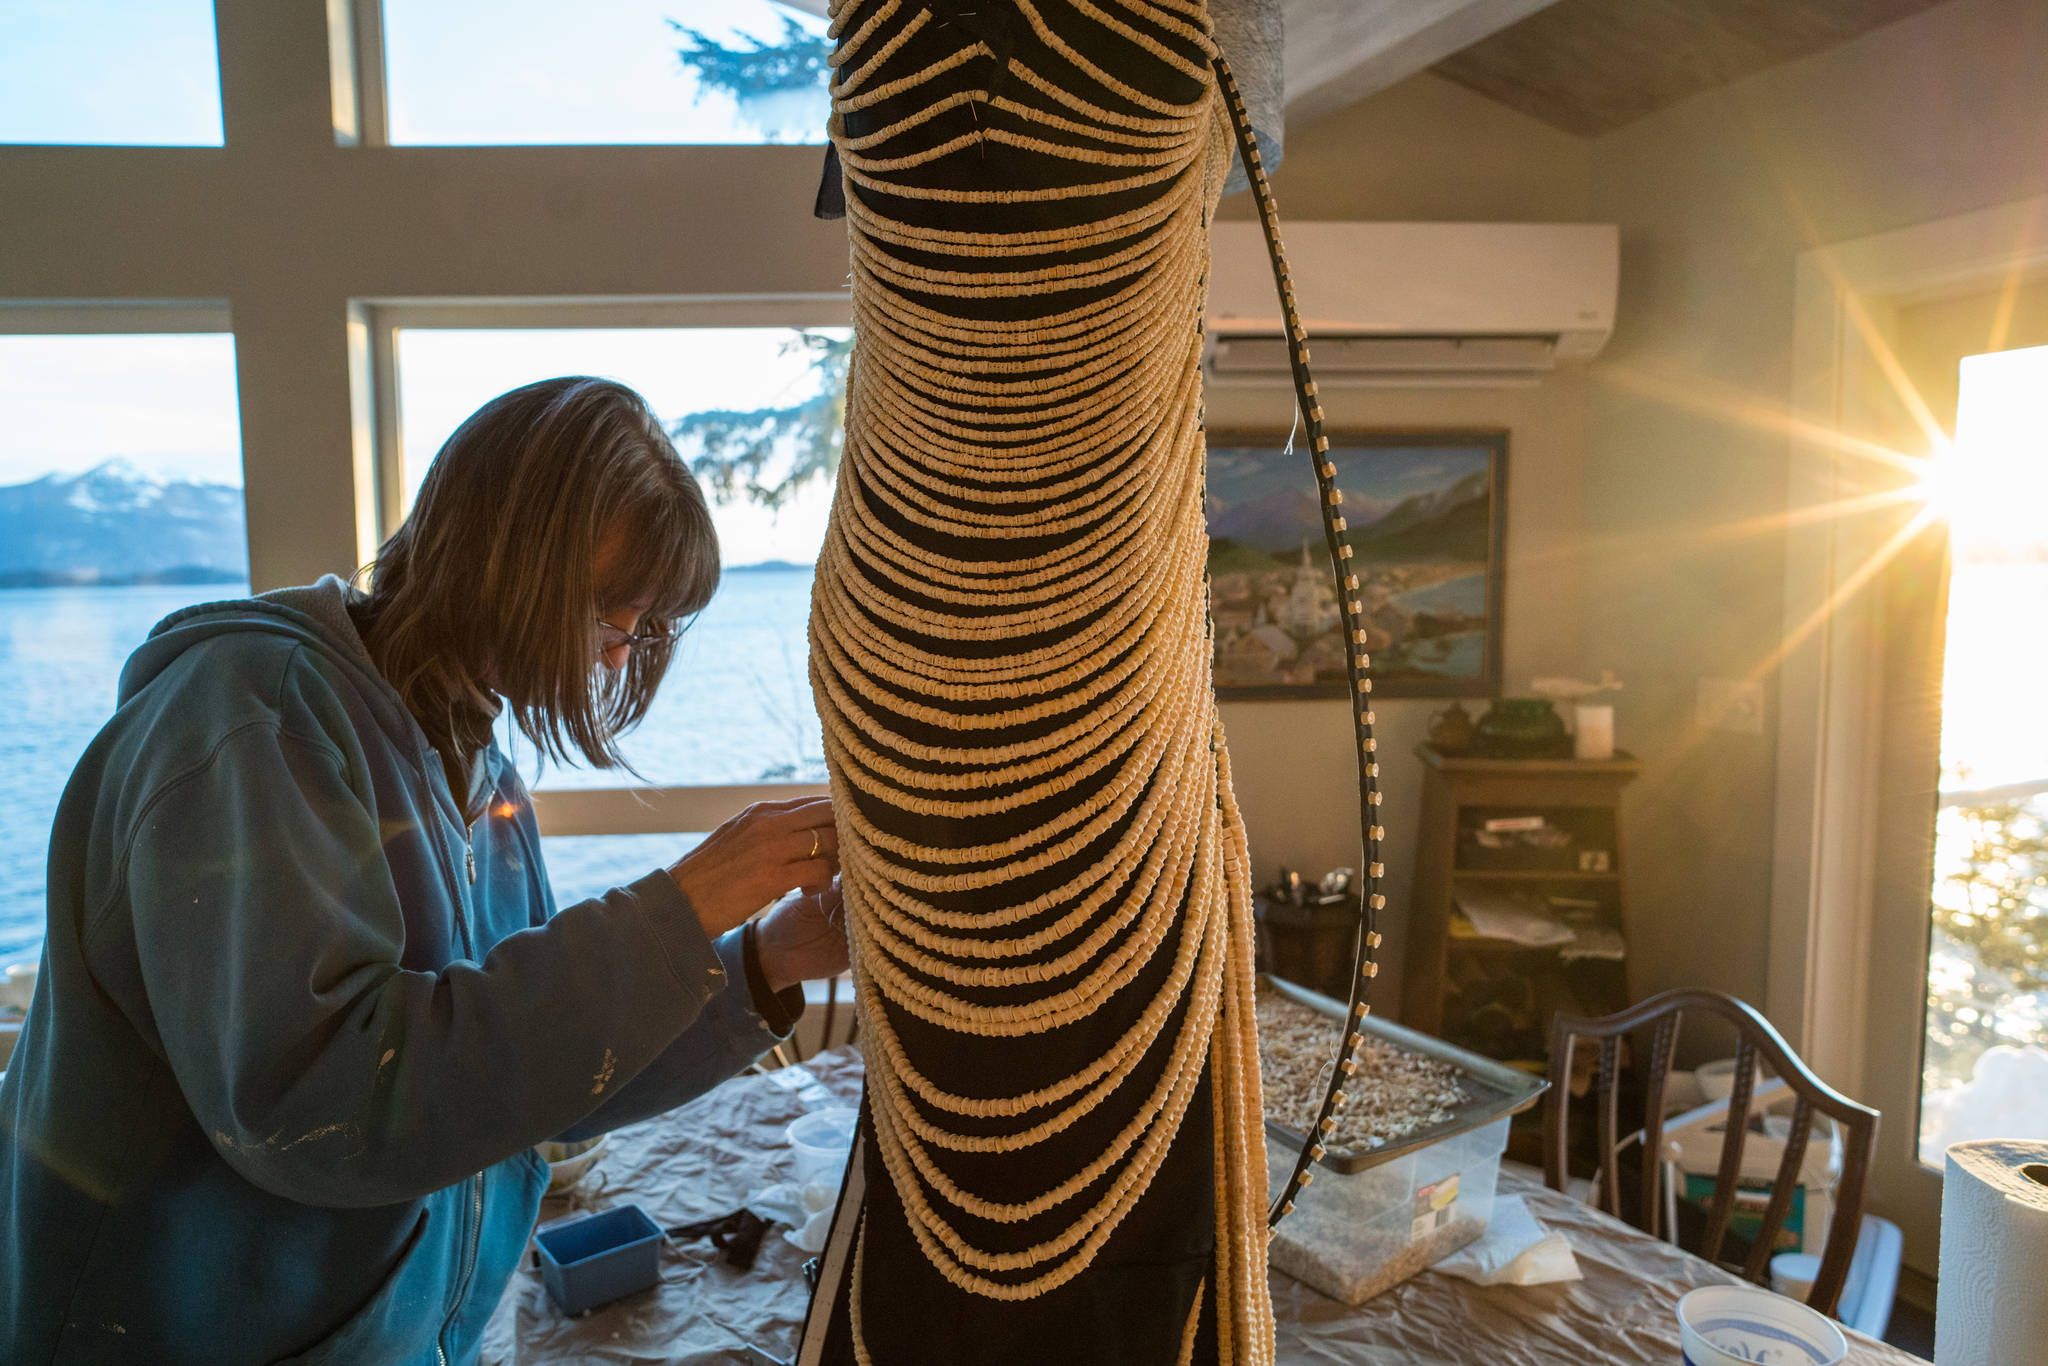 Cynthia Gibson works with 20,000 salmon bones in Sitka. (Photo by Bethany Goodrich)